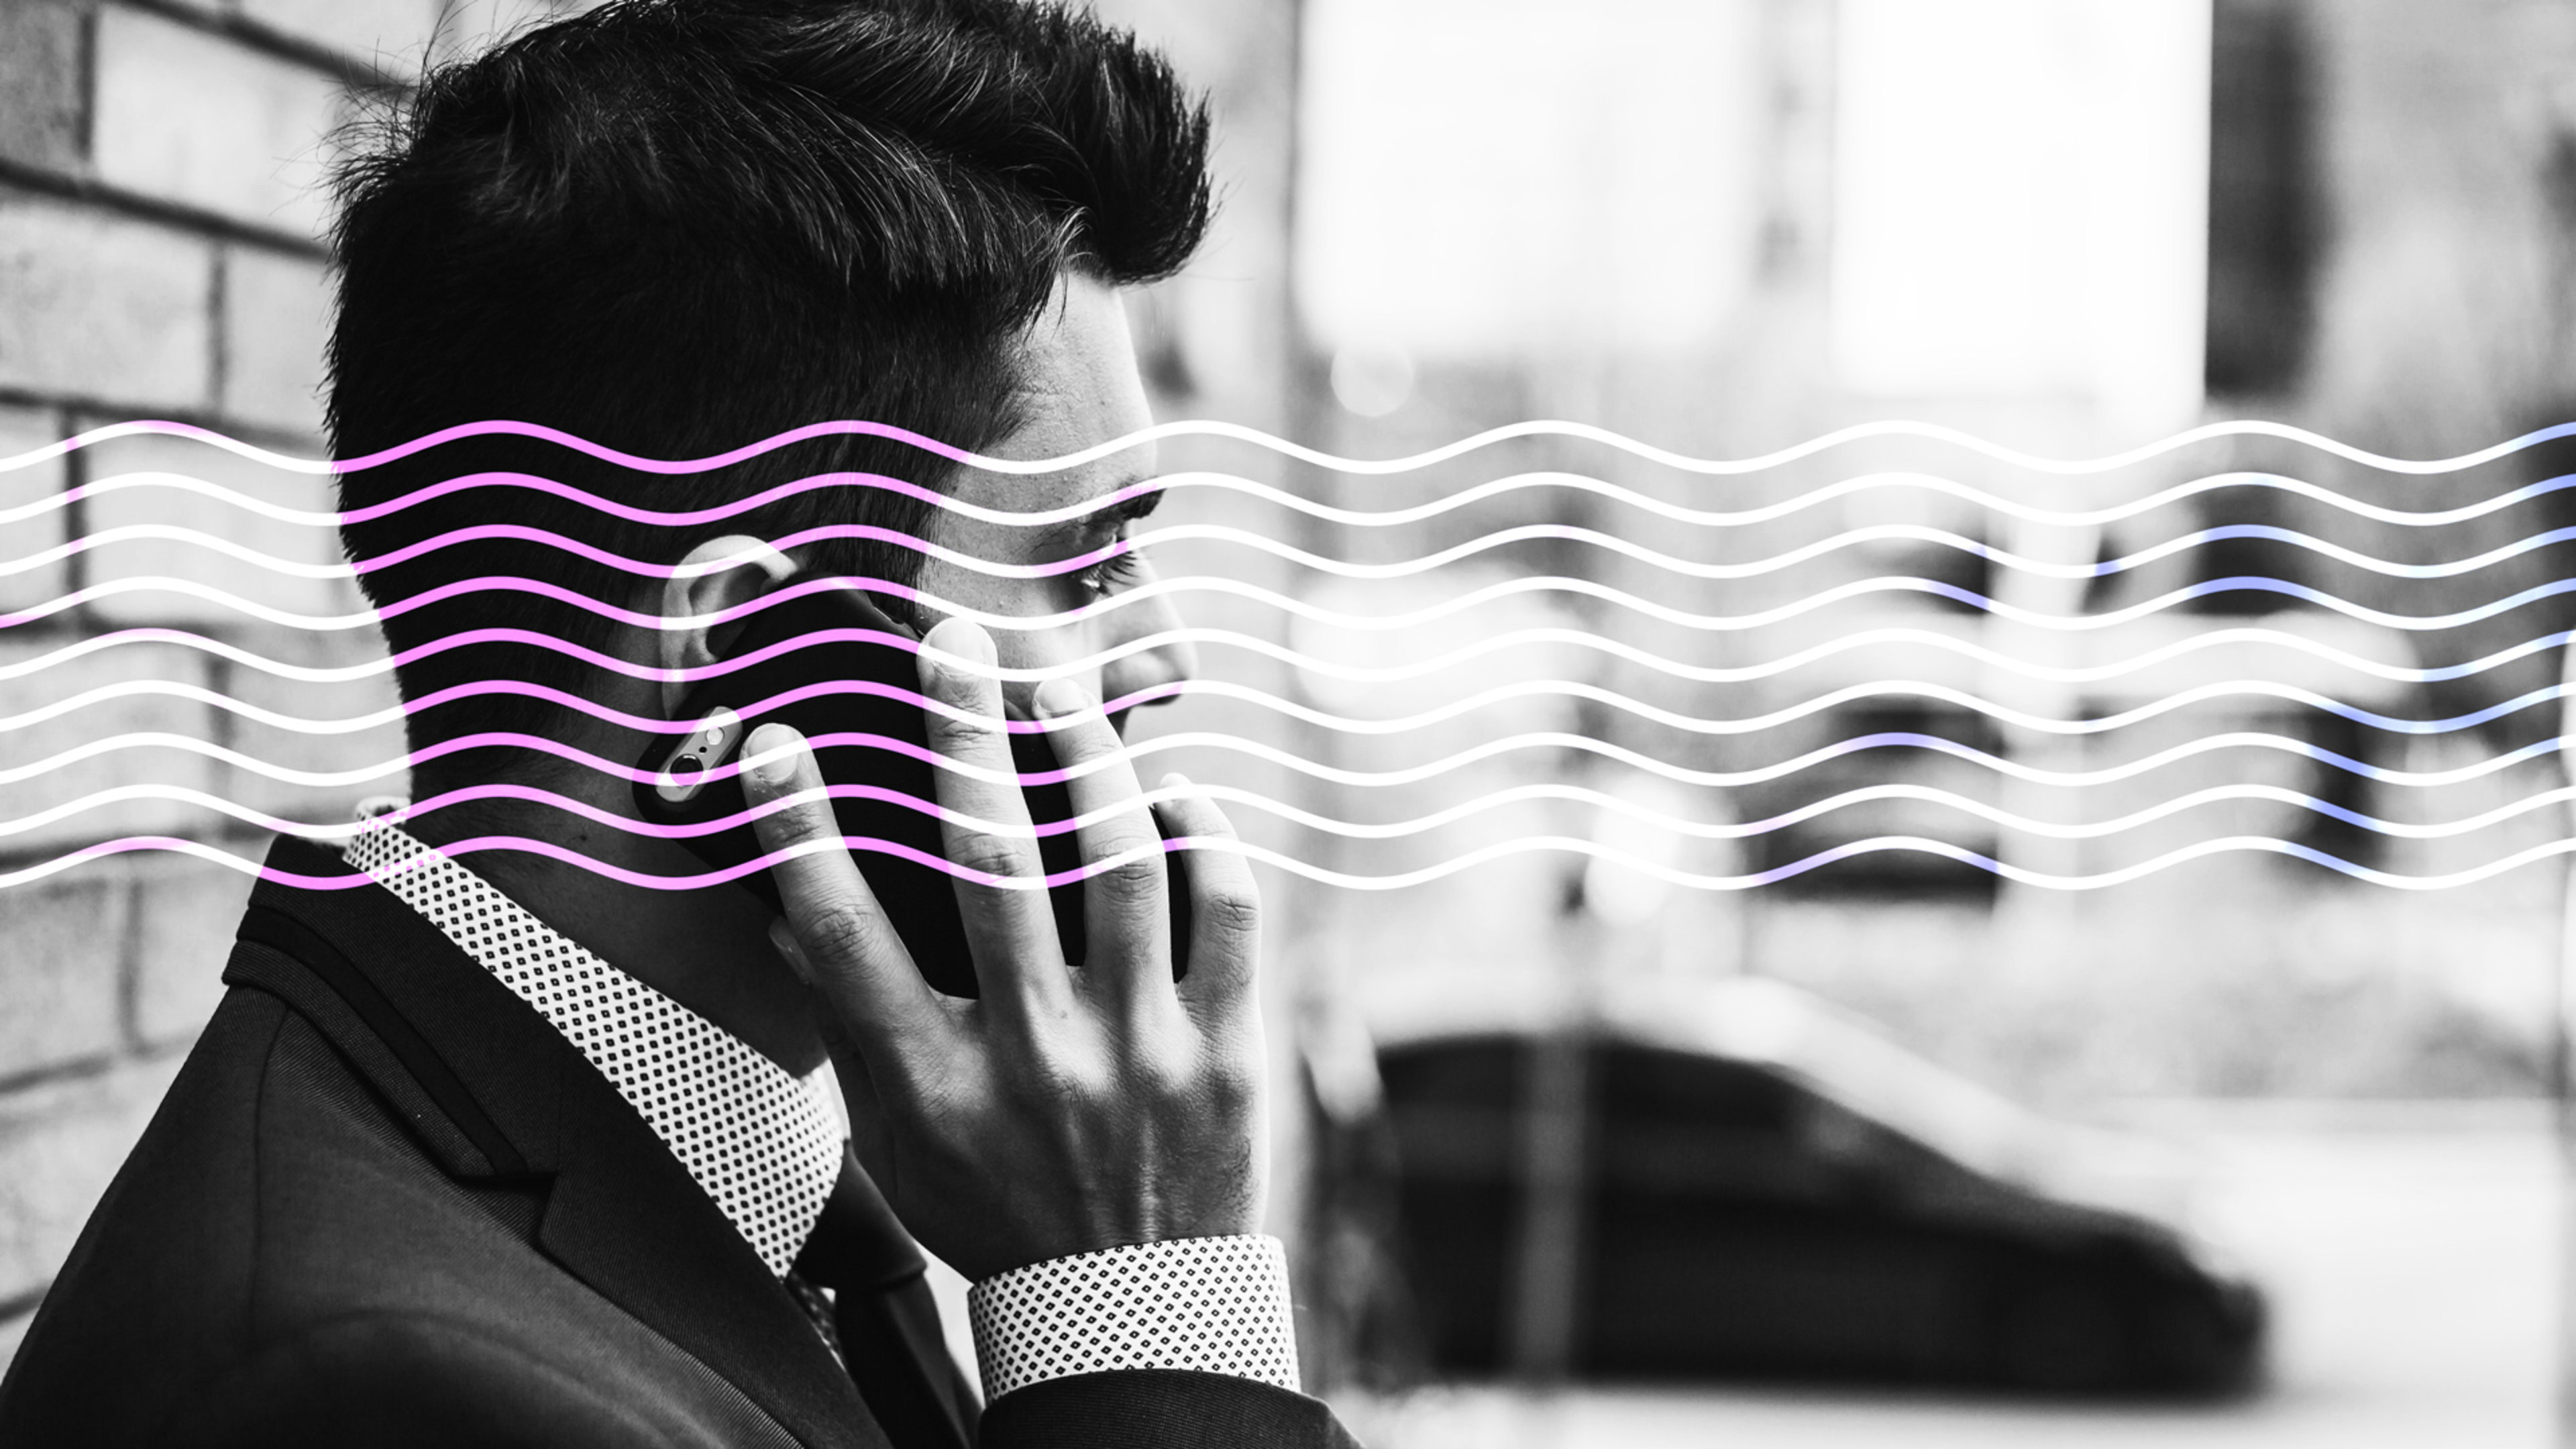 Shhhh, they’re listening: Inside the coming voice-profiling revolution